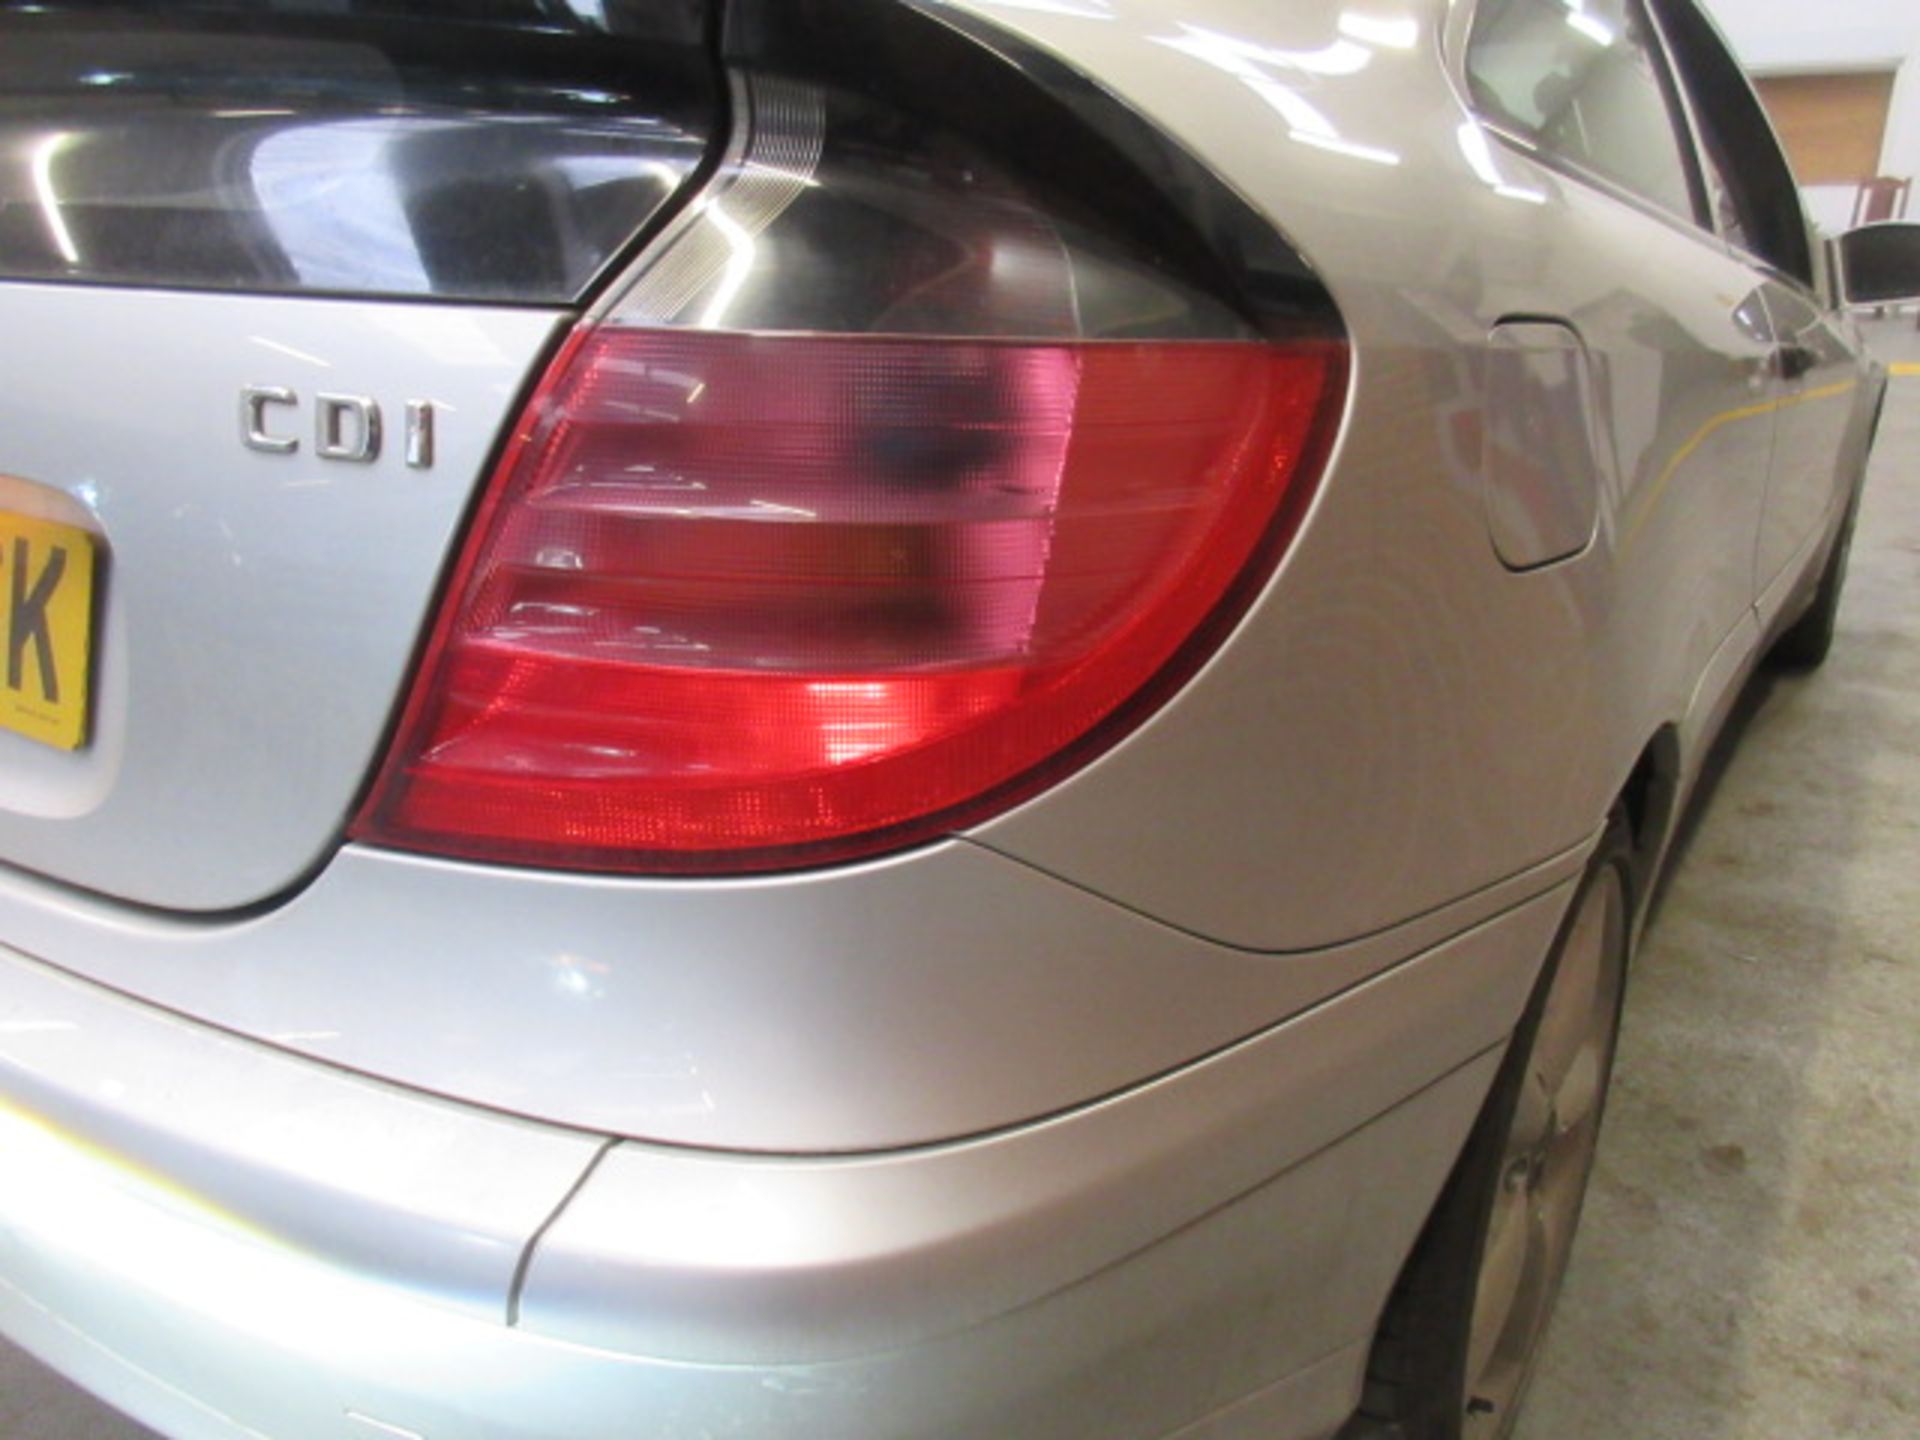 53 04 Mercedes C220 CDI Special Ed - Image 12 of 18